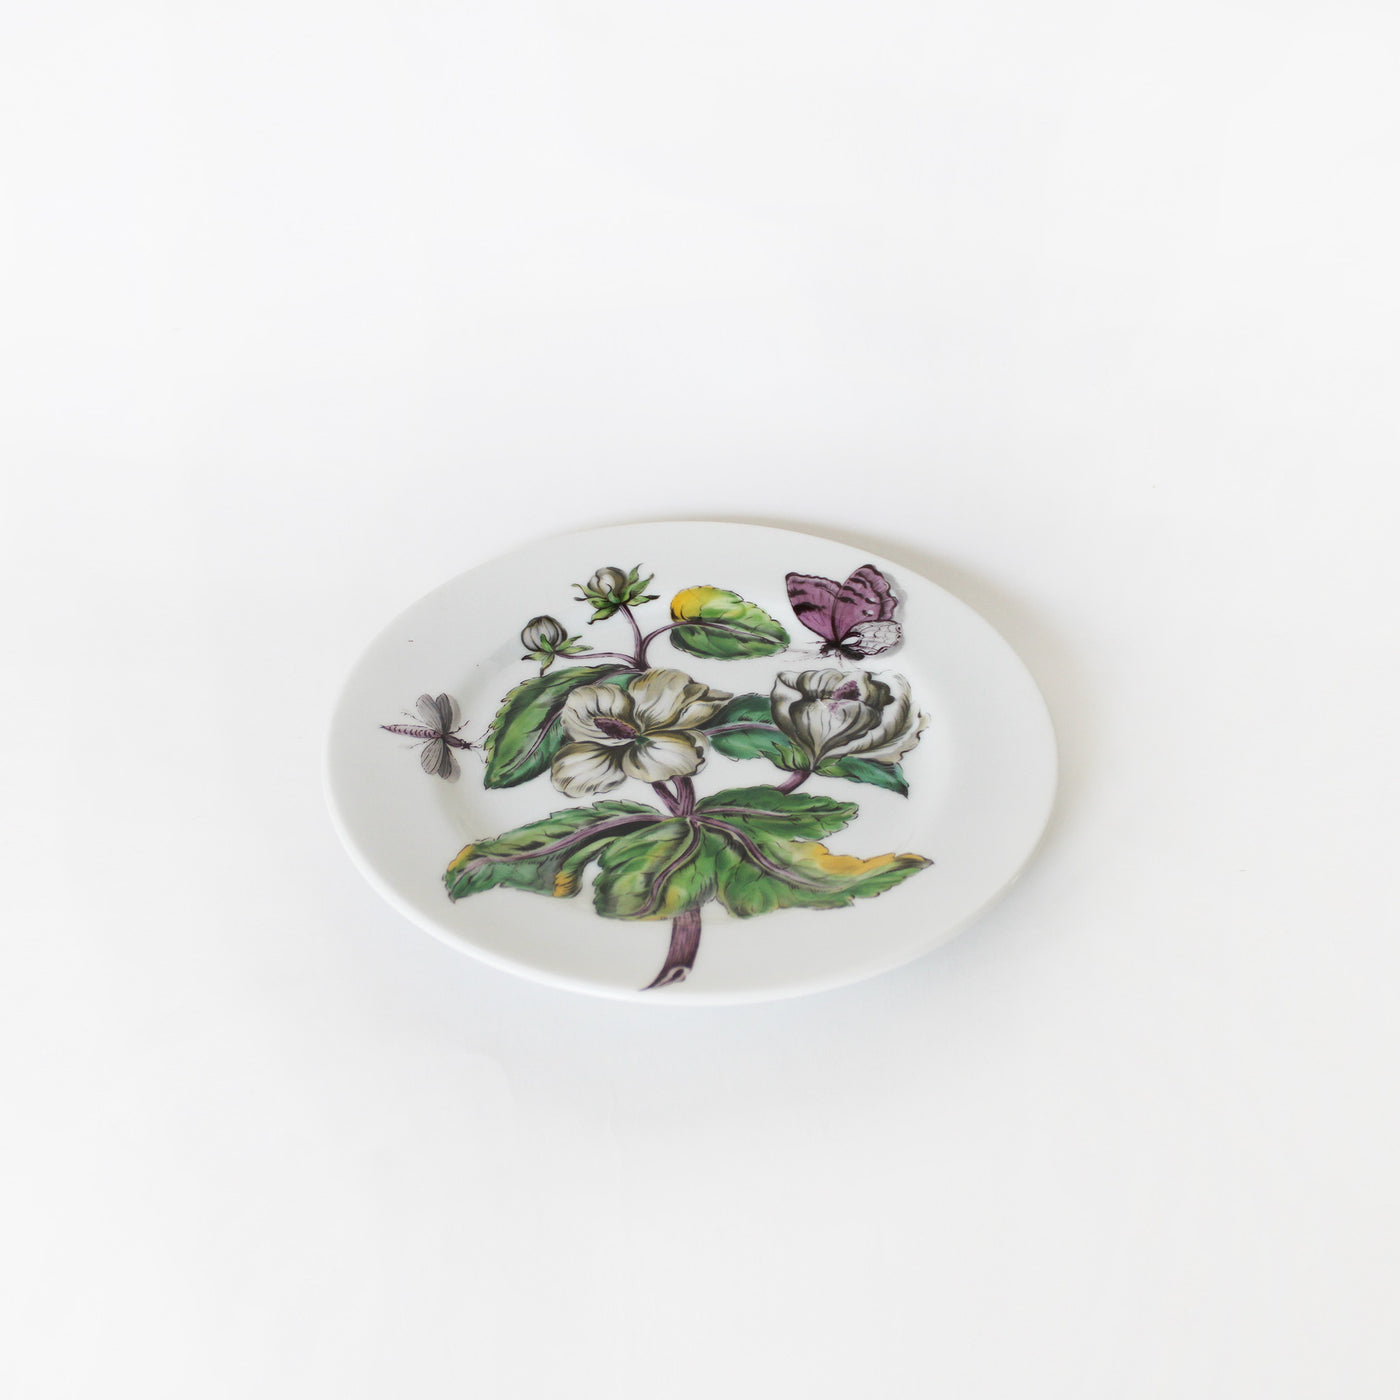 Exotic Plant Plate Set by Mottahedeh Design